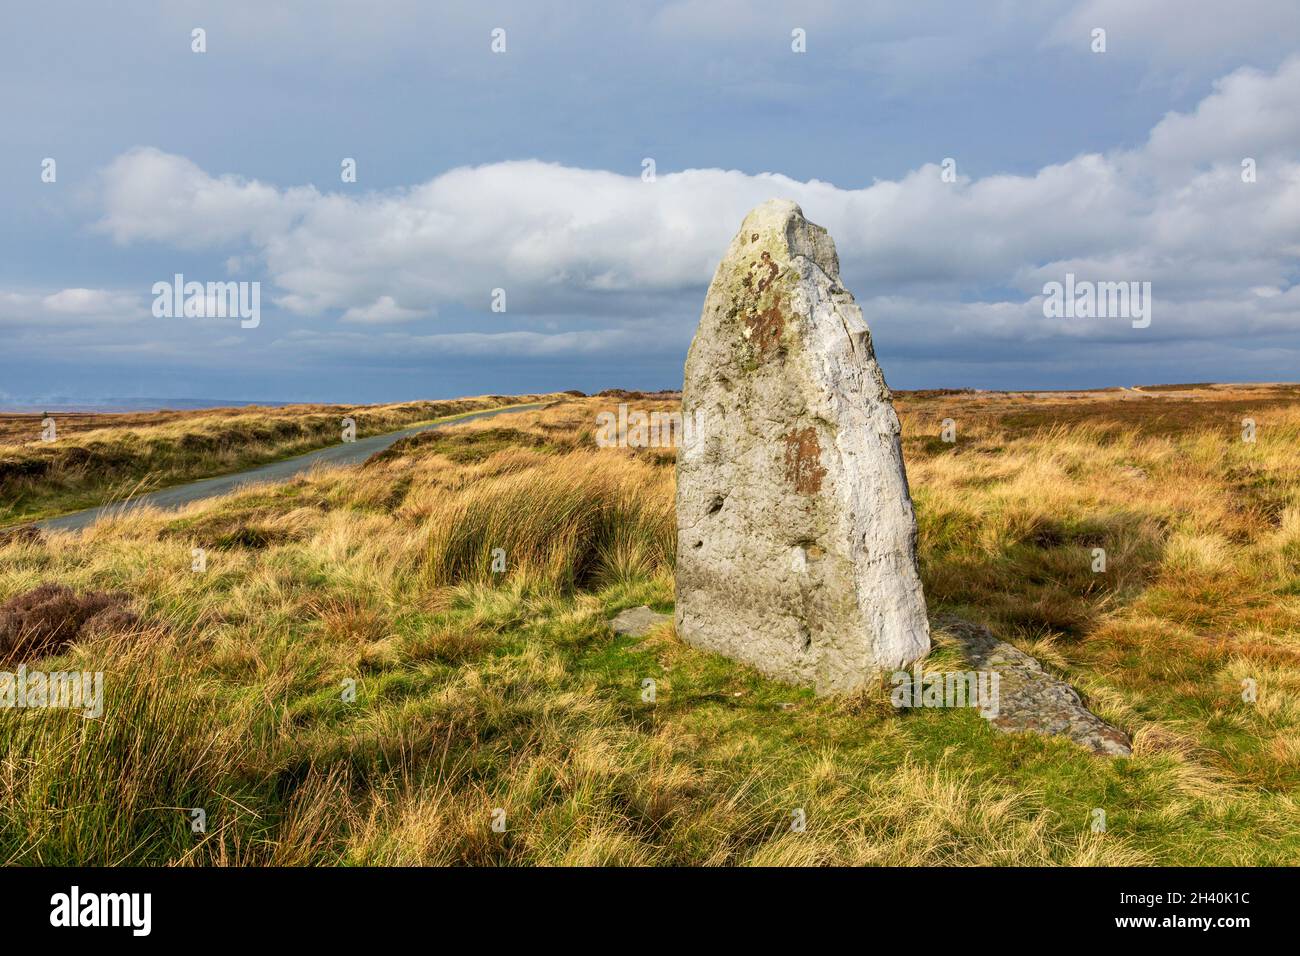 The Millenium Stone on Danby High Moor in the North York Moors Nation Park, Yorkshire, England Stock Photo